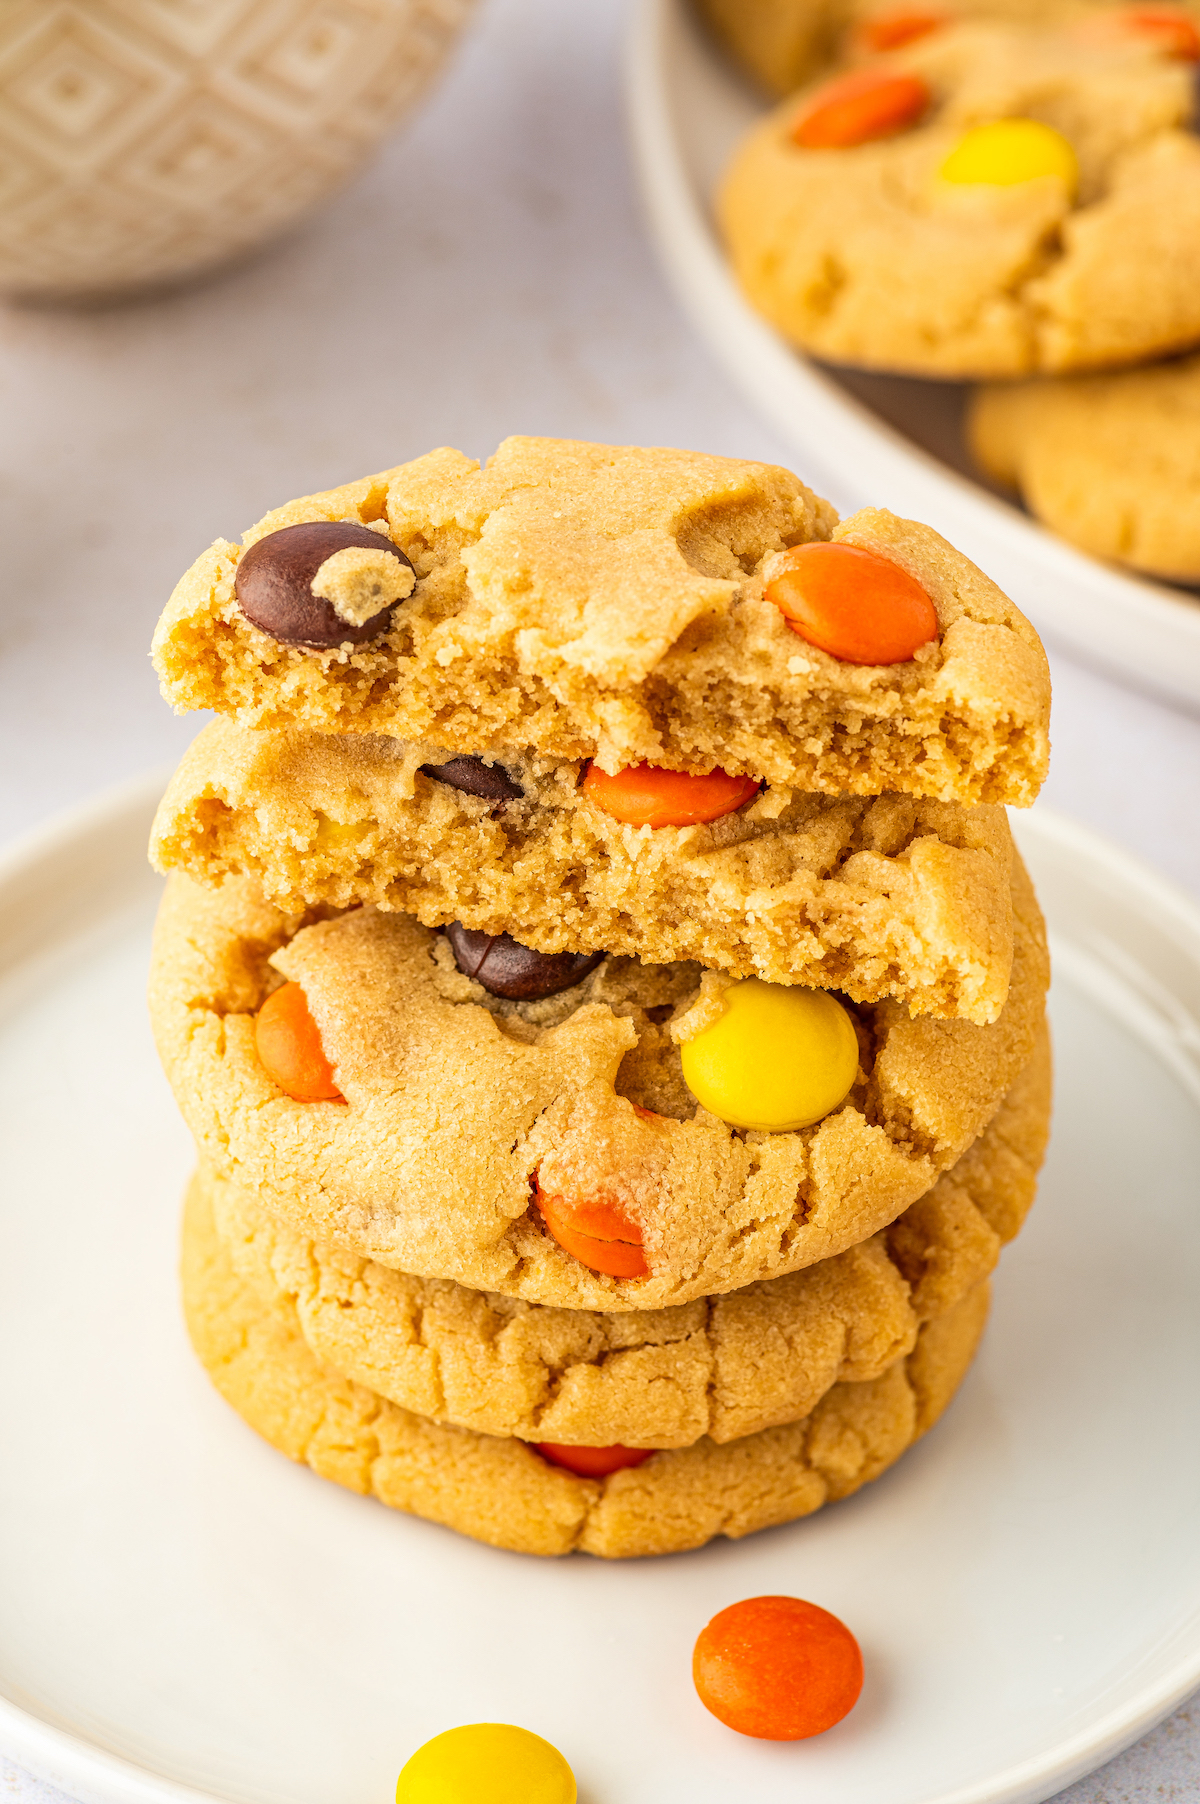 https://thenovicechefblog.com/wp-content/uploads/2014/04/Reeses-Pieces-Cookies-13.jpeg